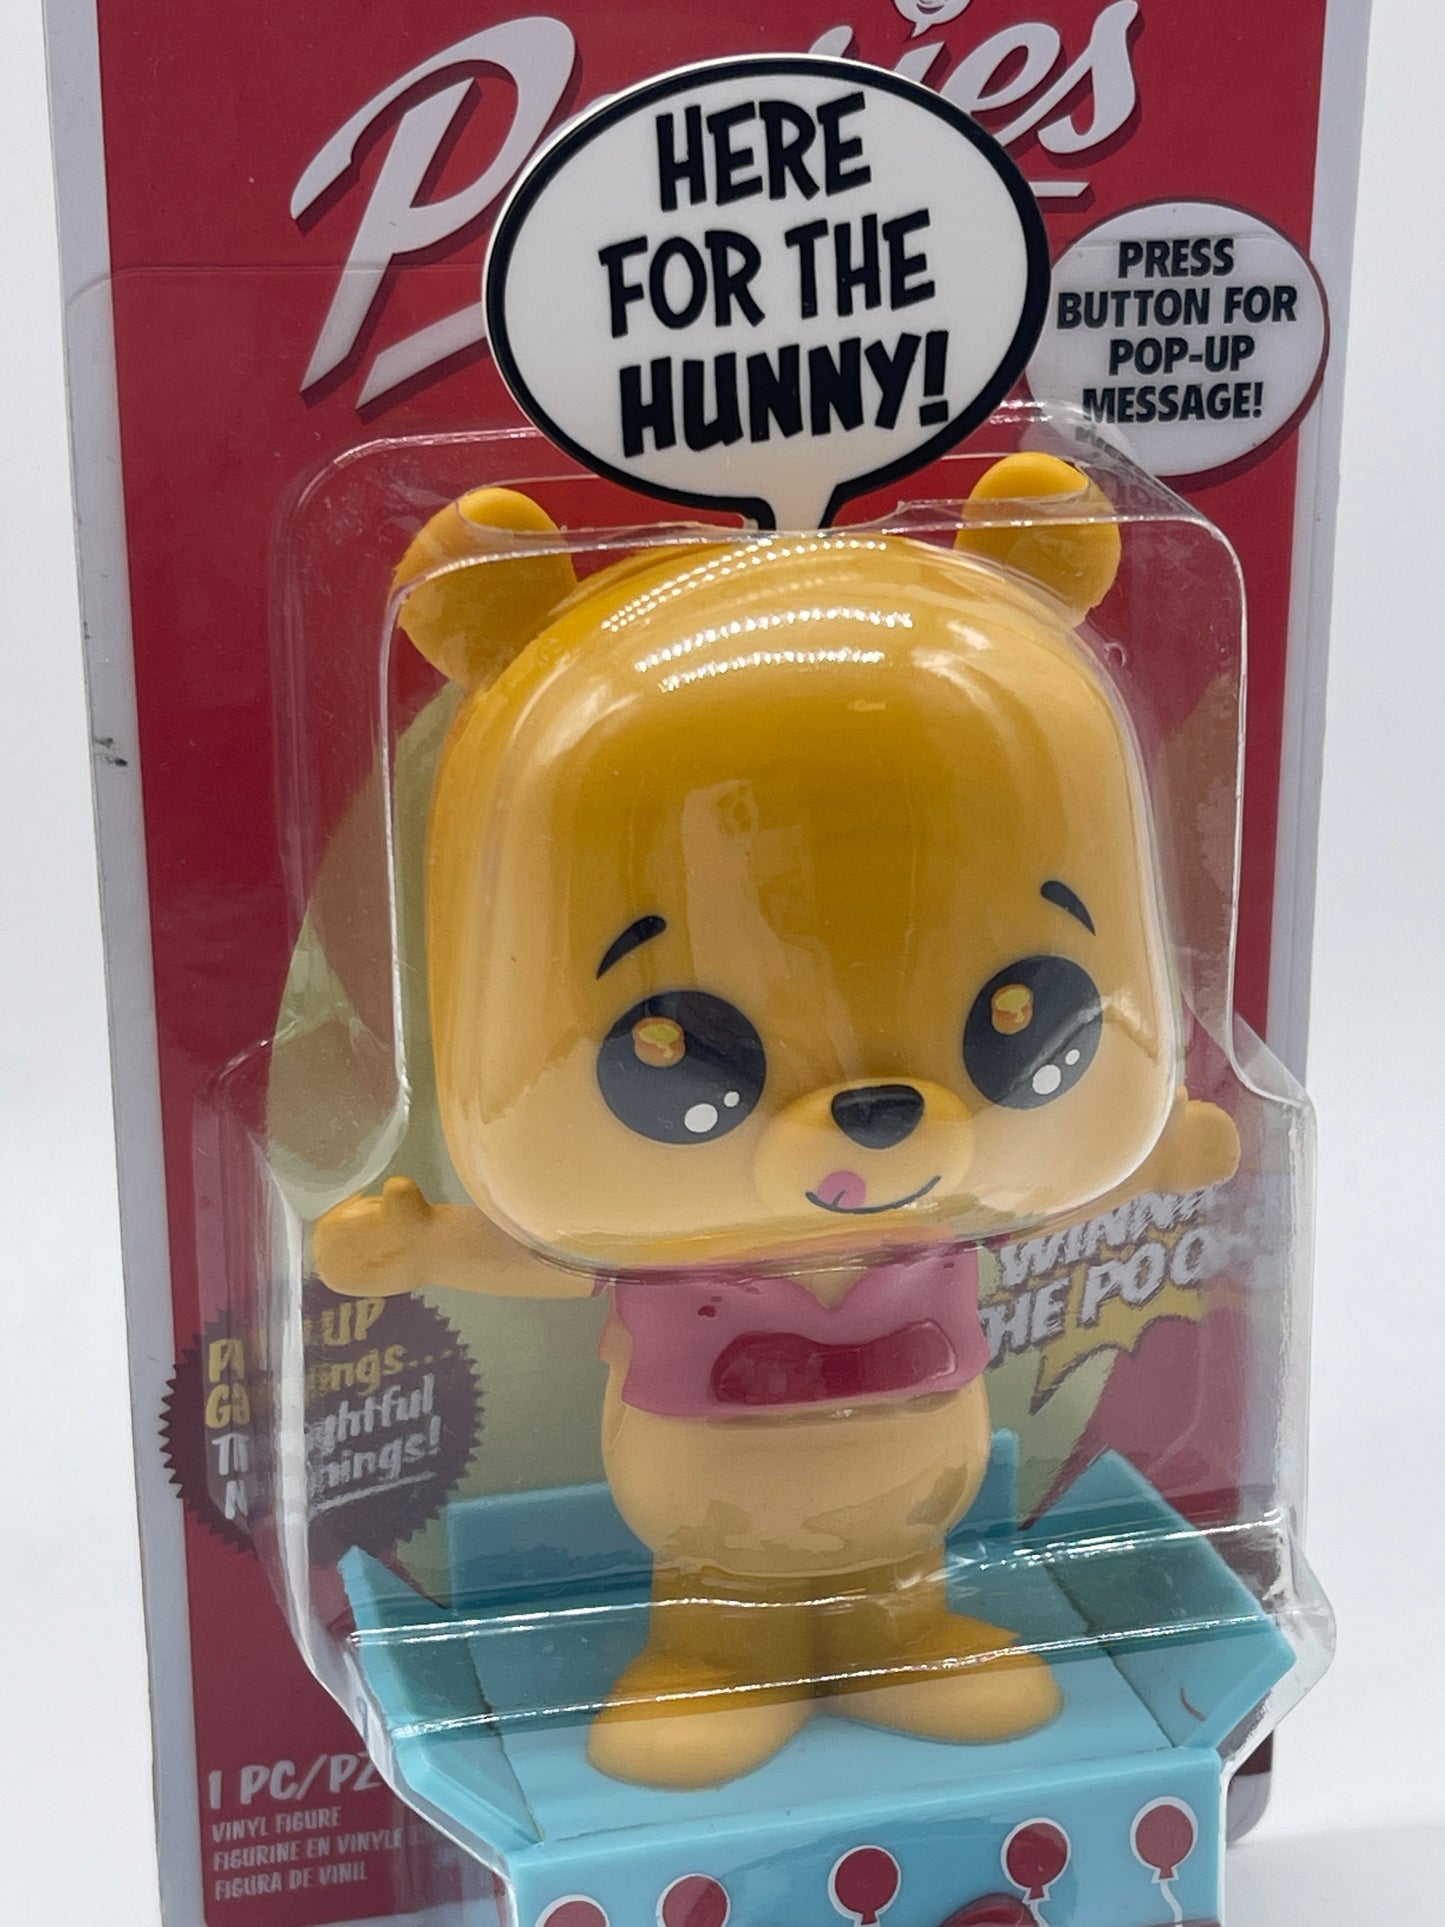 Funko Popsies "Winnie the Pooh" Here for the Hunny with Pop-Up Message (2021)